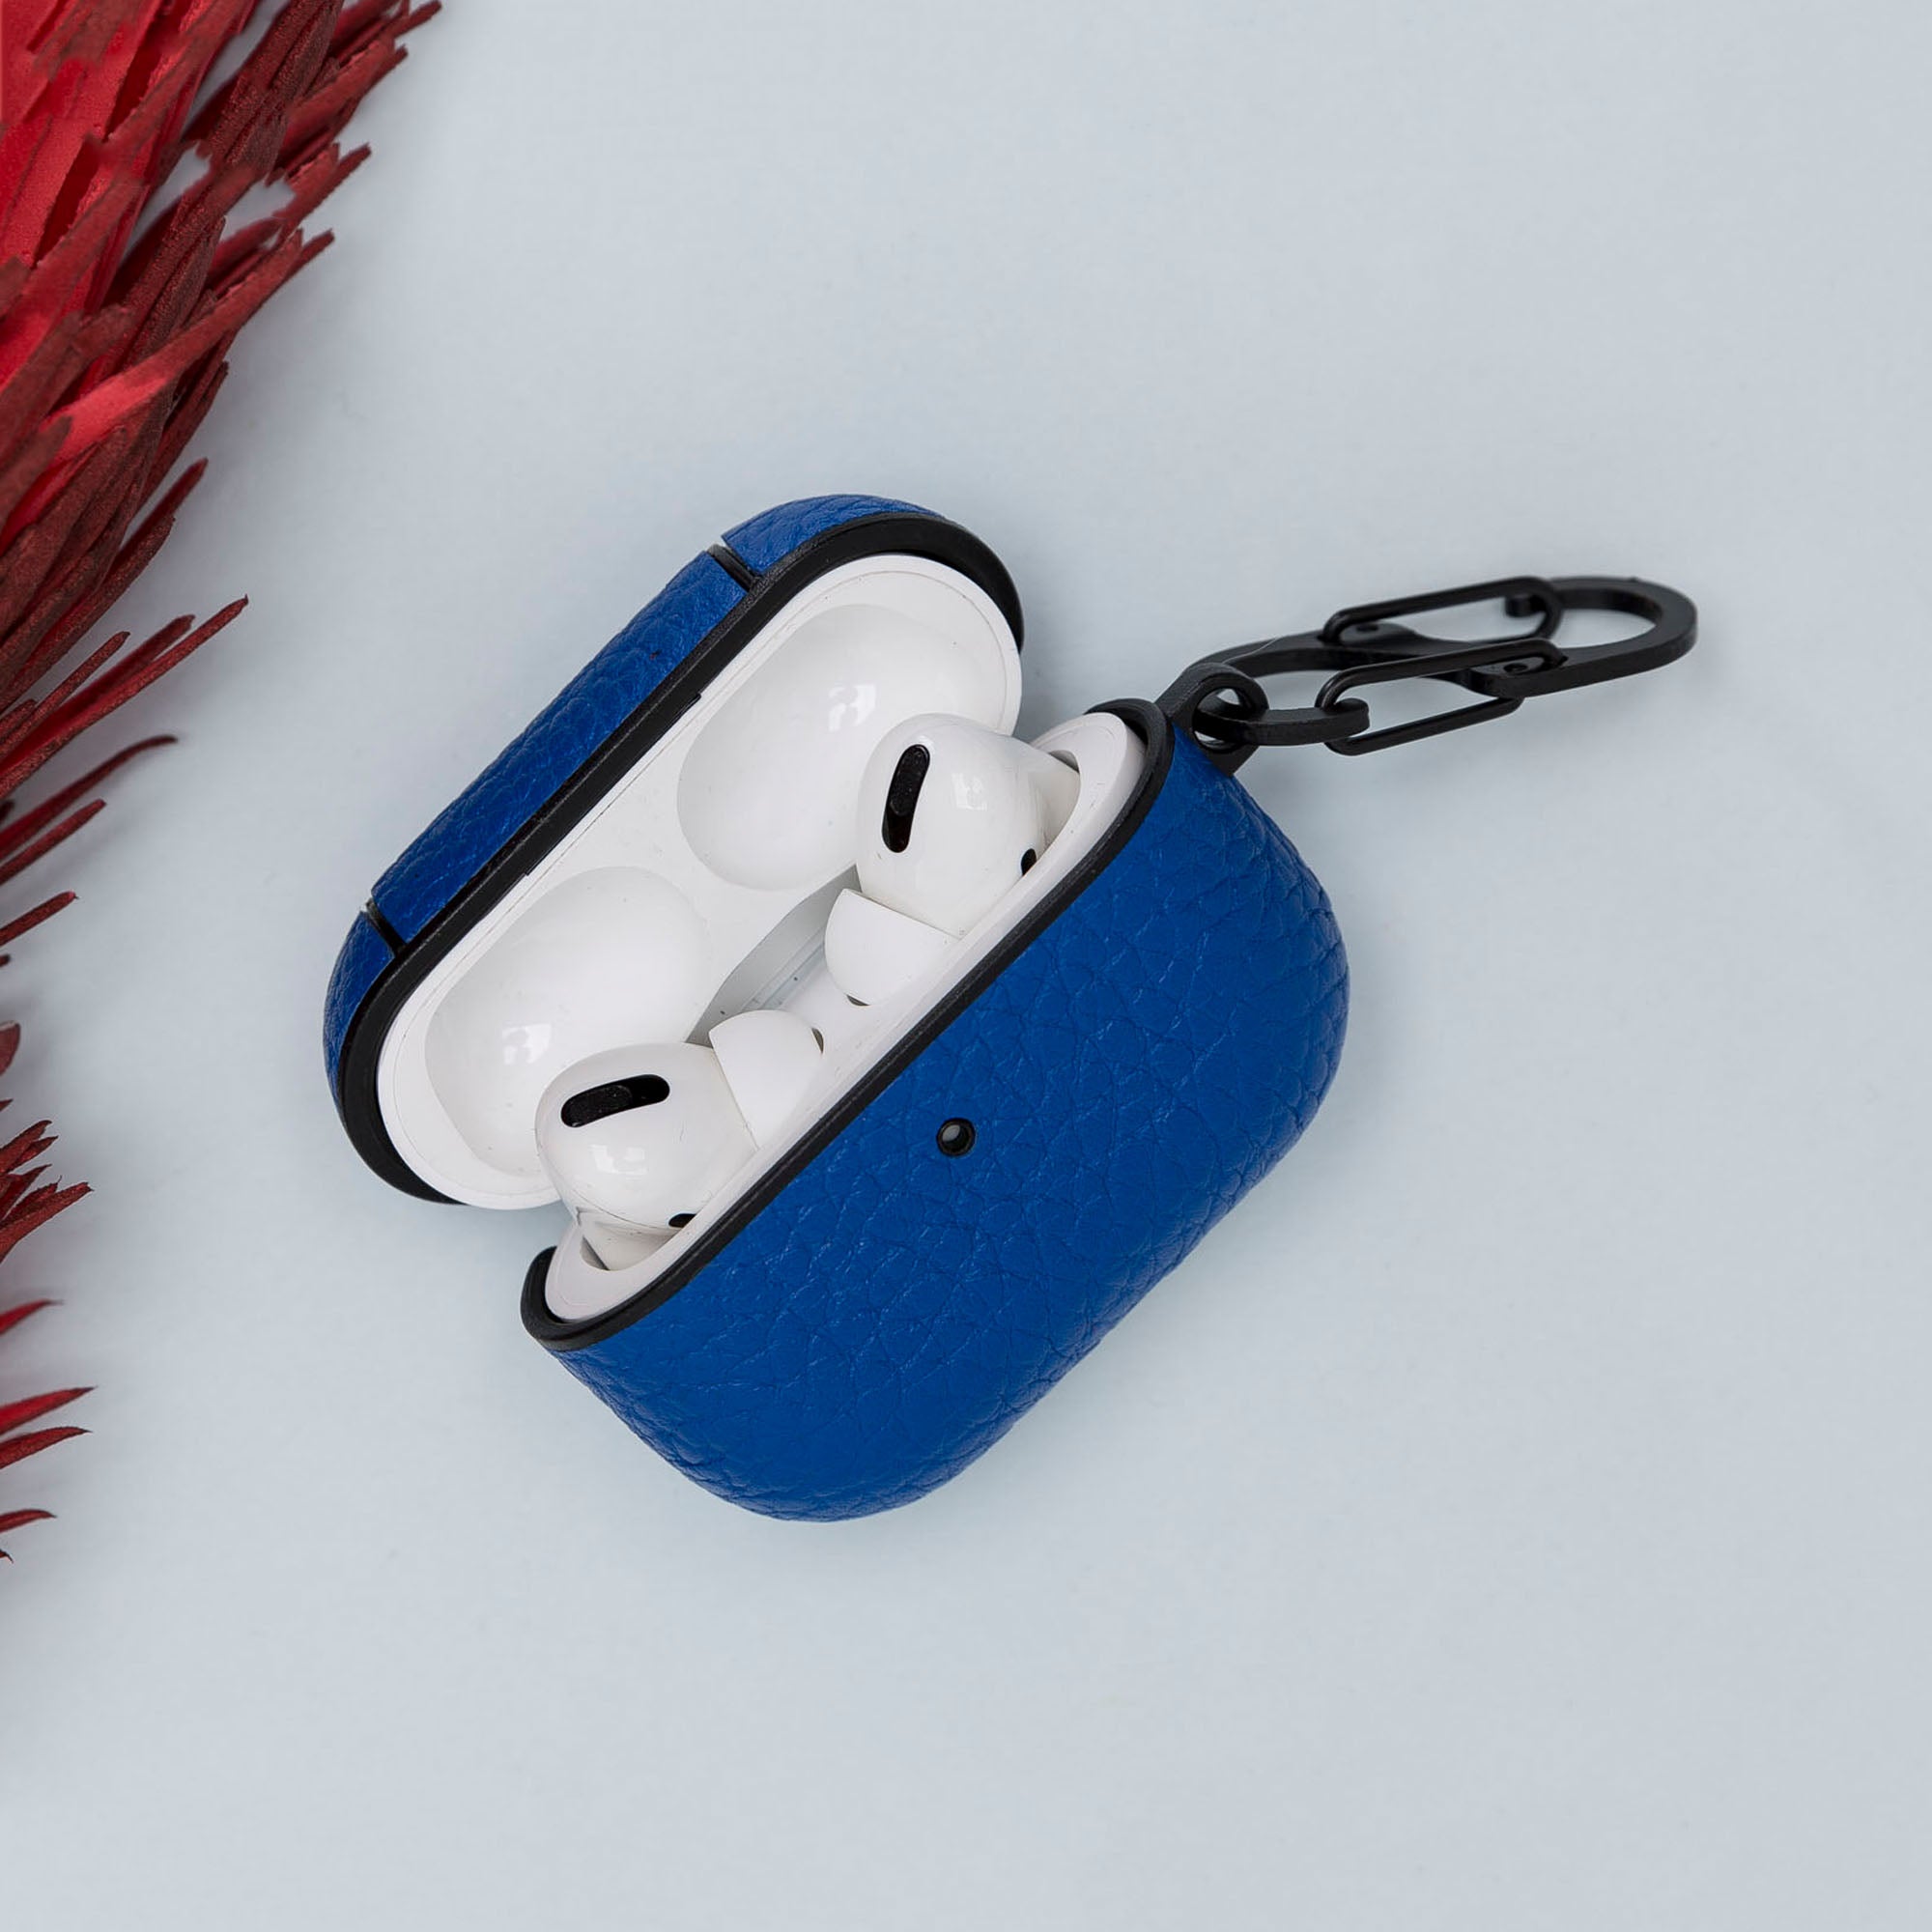 Juni Leather Capsule Case for AirPods Pro - BLUE - saracleather